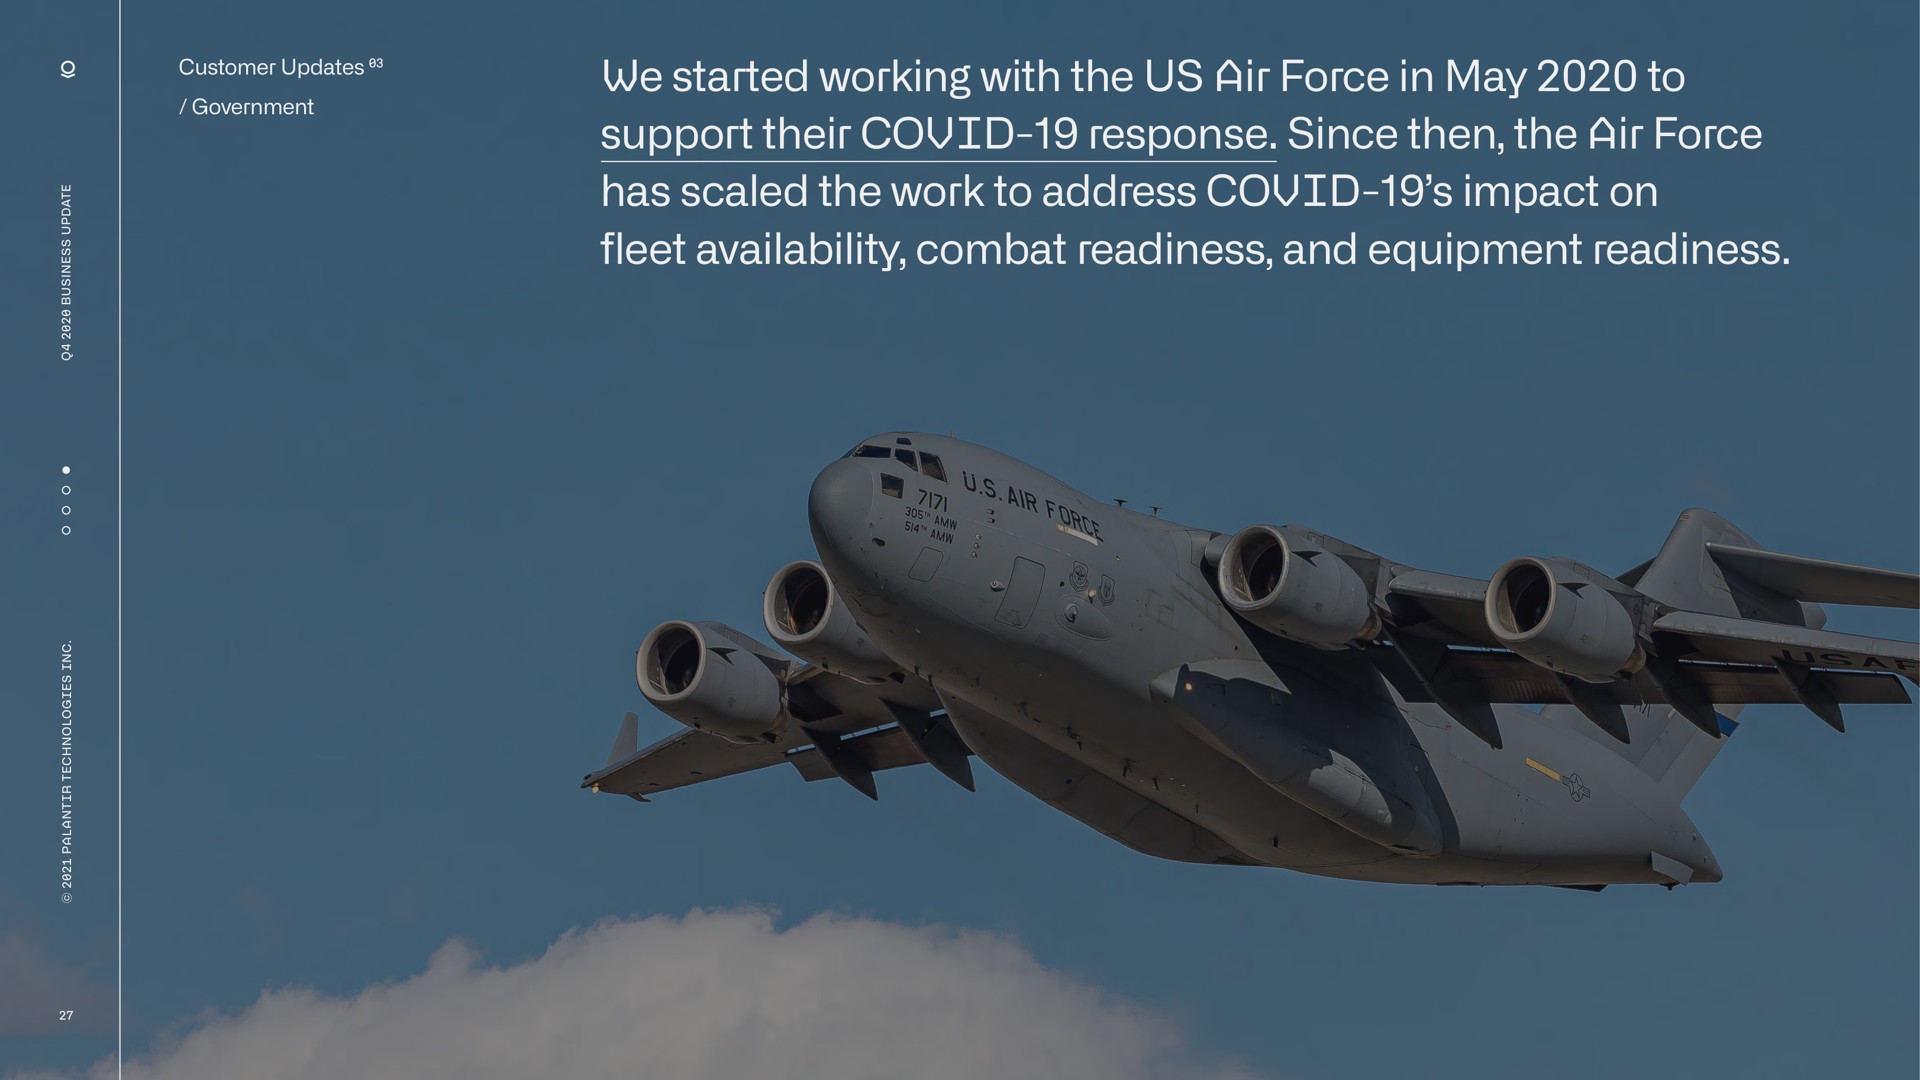 we started working with the us air force in may to support their covid response since then the air force has scaled the work to address covid impact on fleet availability combat readiness and equipment readiness | Palantir